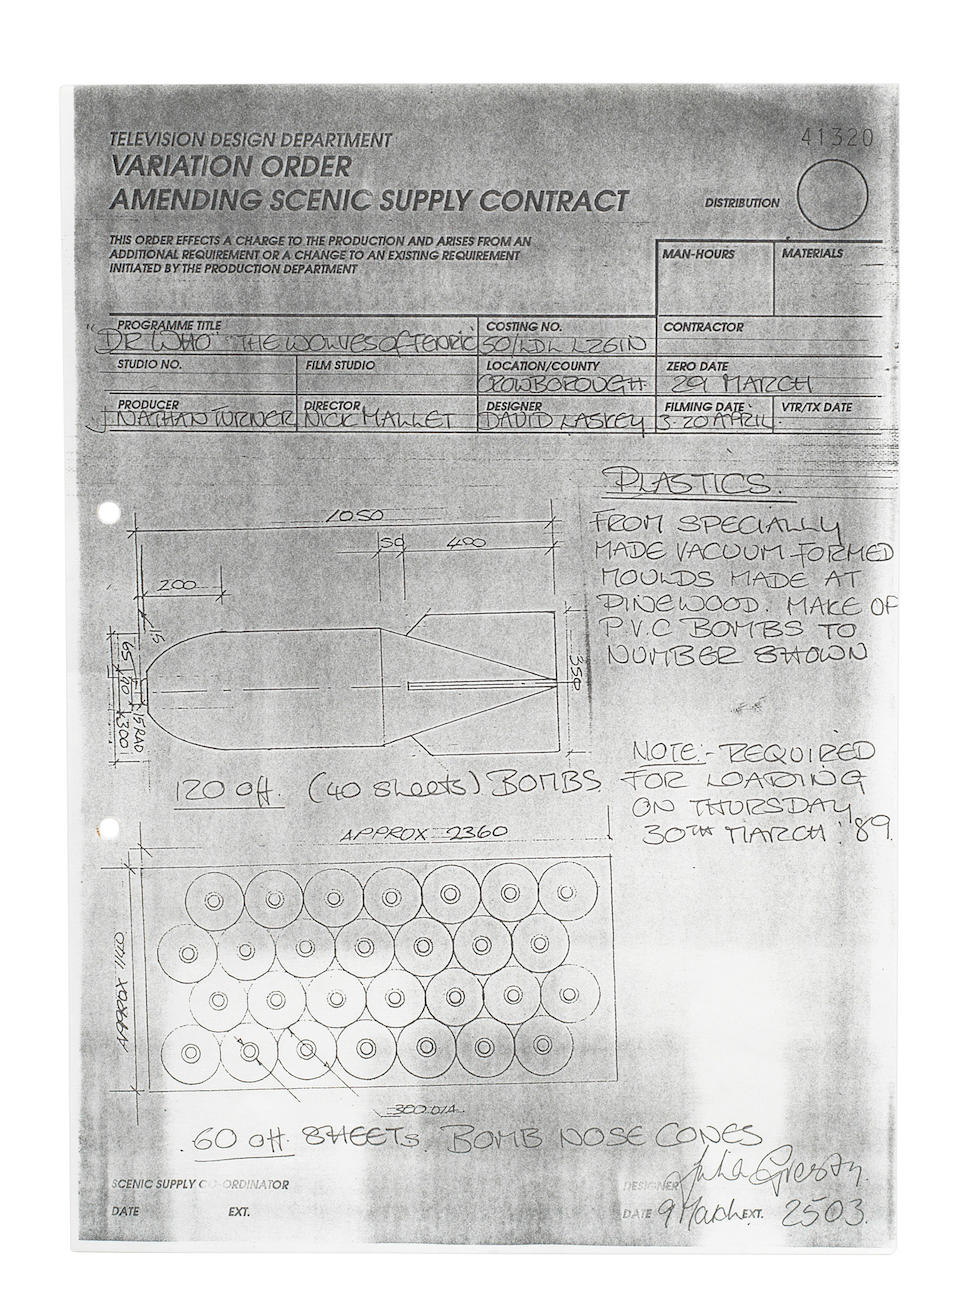 Doctor Who - The Curse of Fenric: a prop chemical bomb and related construction paperwork,  BBC, 1989, 4